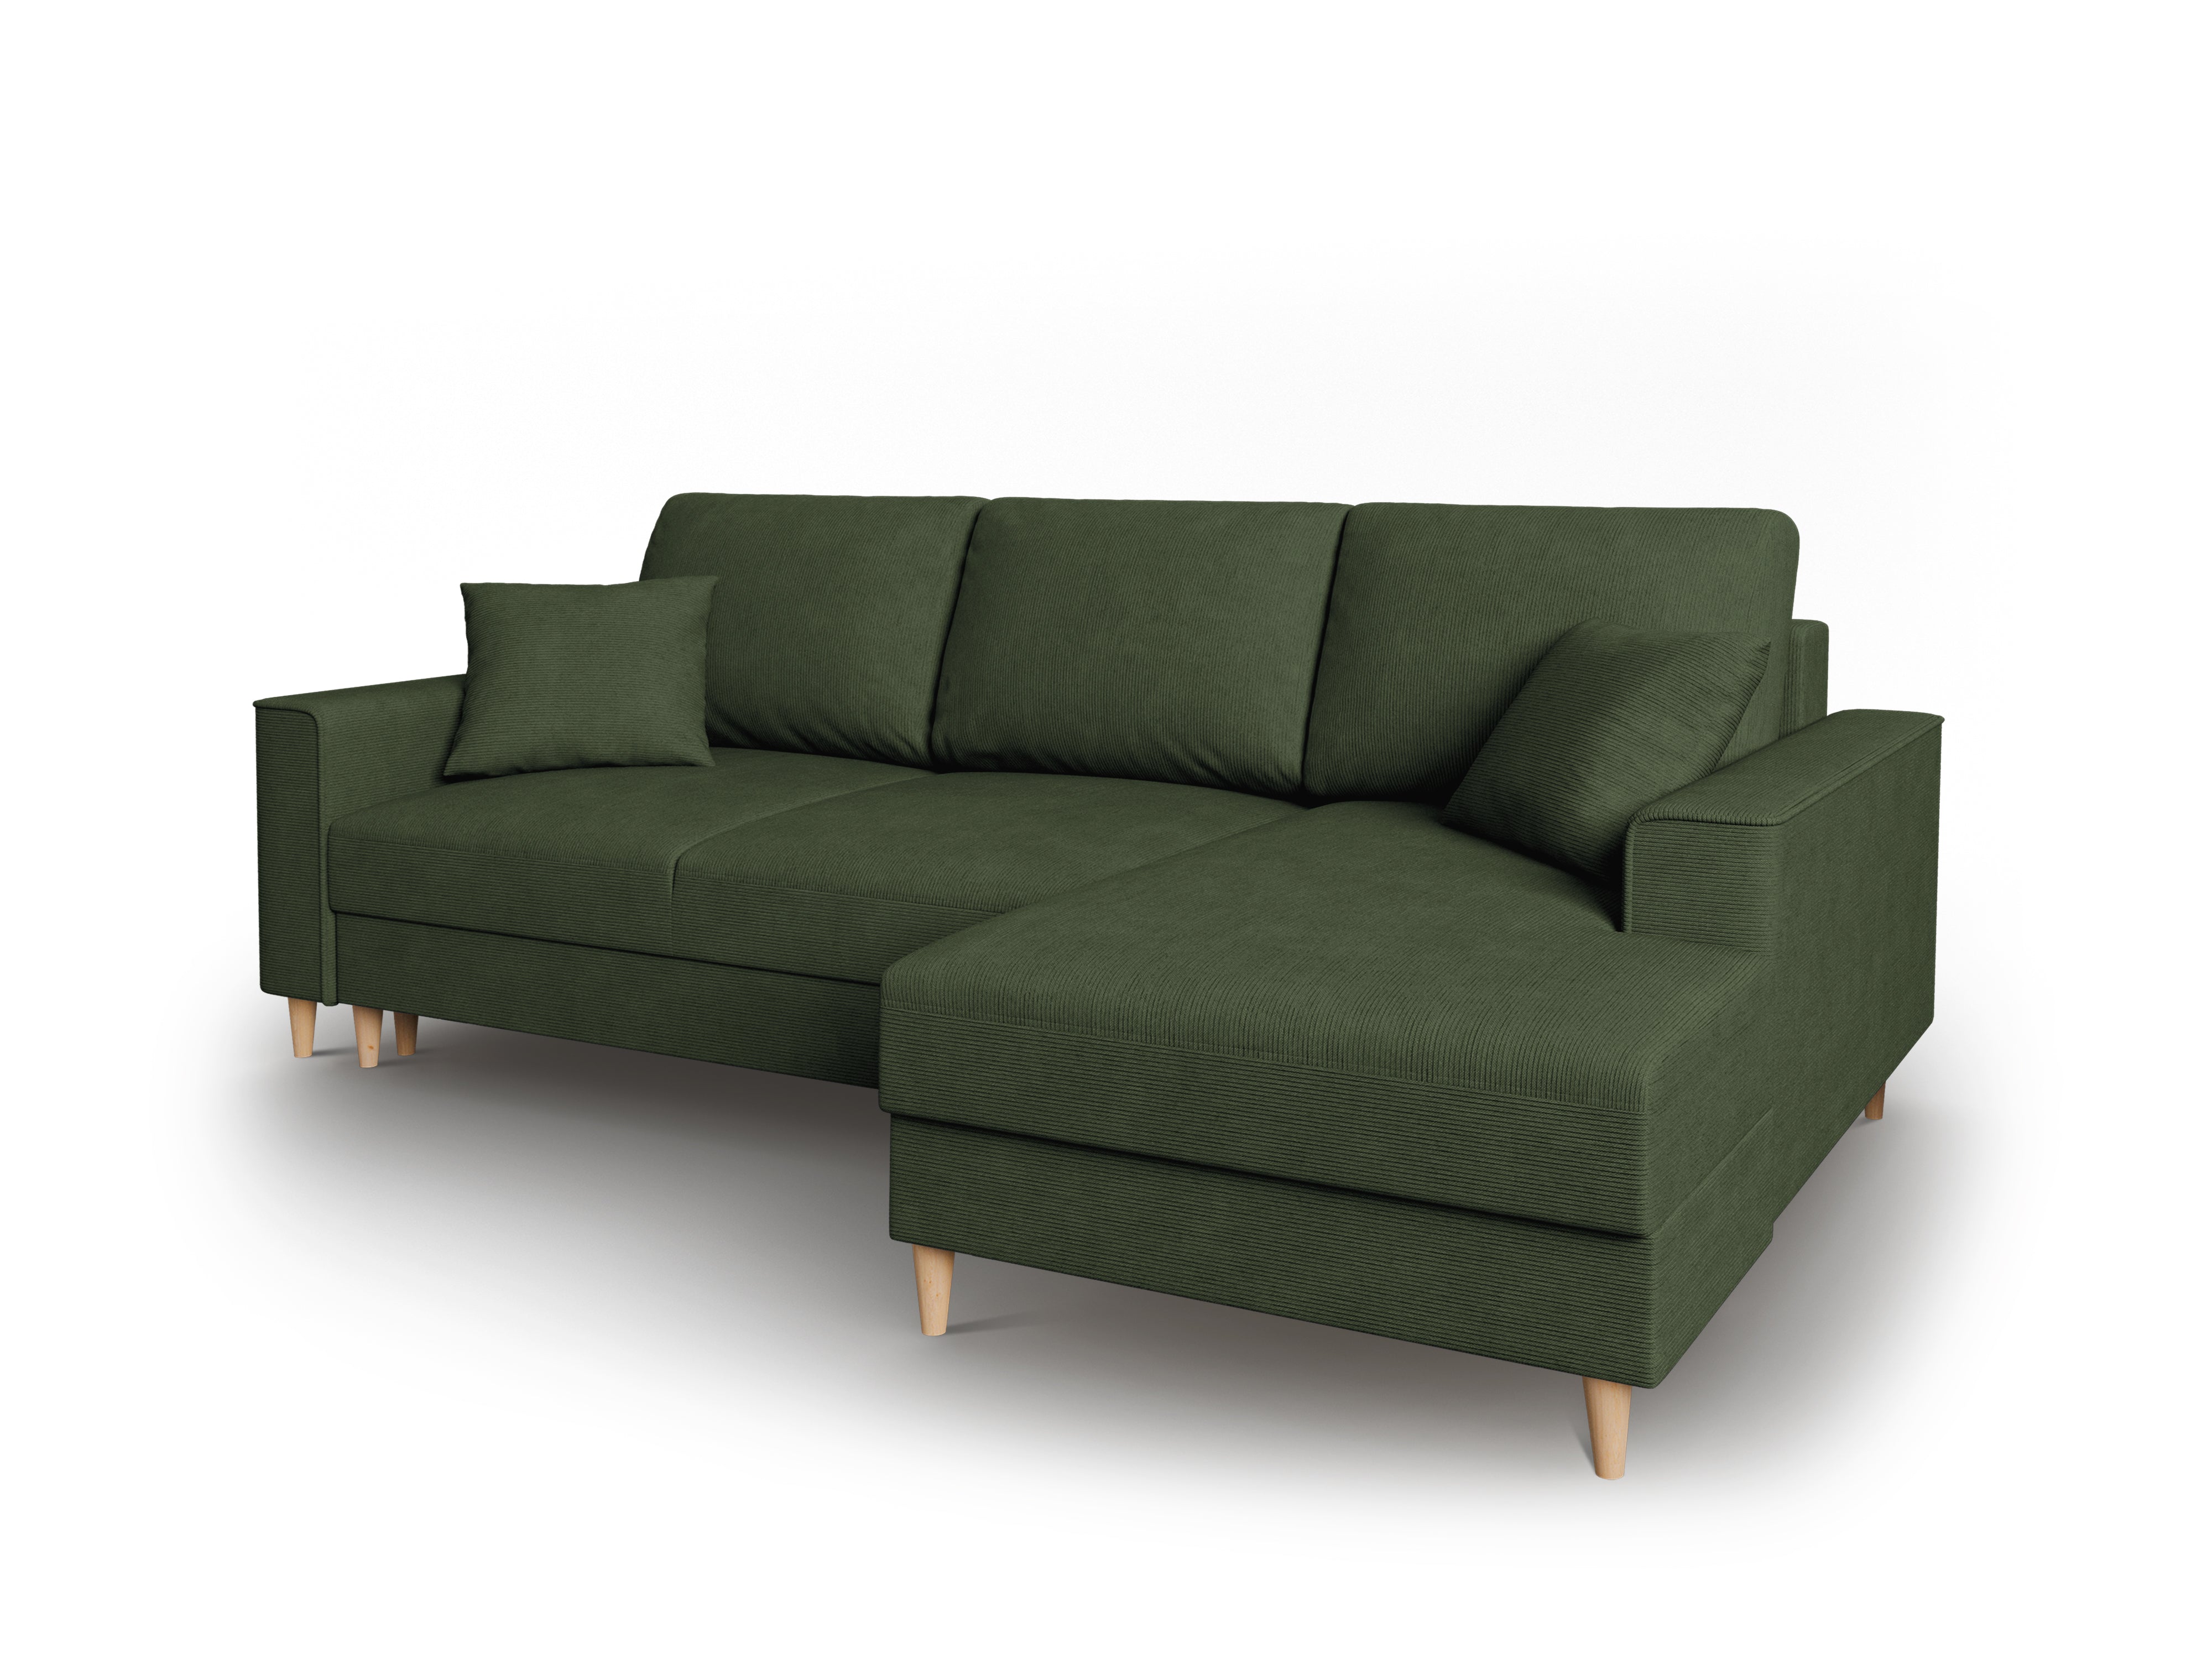 Right Corner Sofa With Bed Function And Box, "Cartadera", 4 Seats, 225x147x90
Made in Europe, Mazzini Sofas, Eye on Design